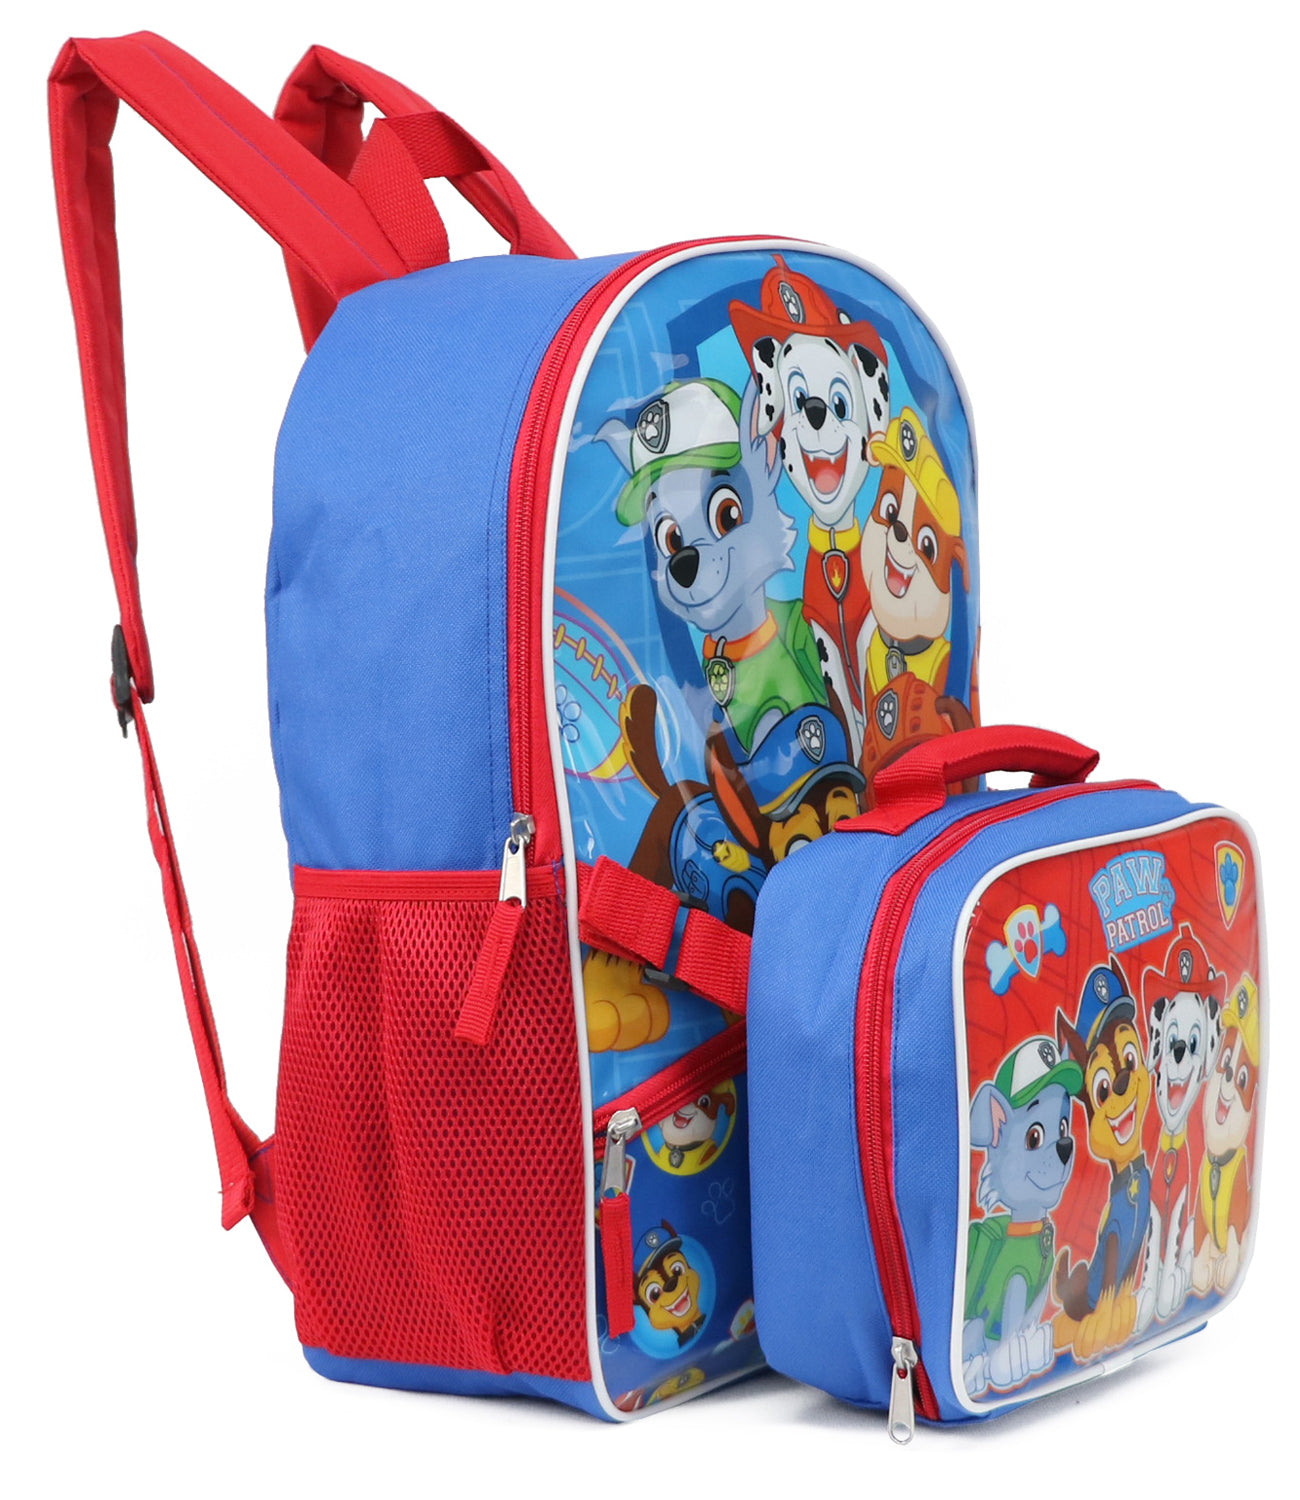  Nickelodeon Paw Patrol Lunch Bag Lunchbox (Blue on Red